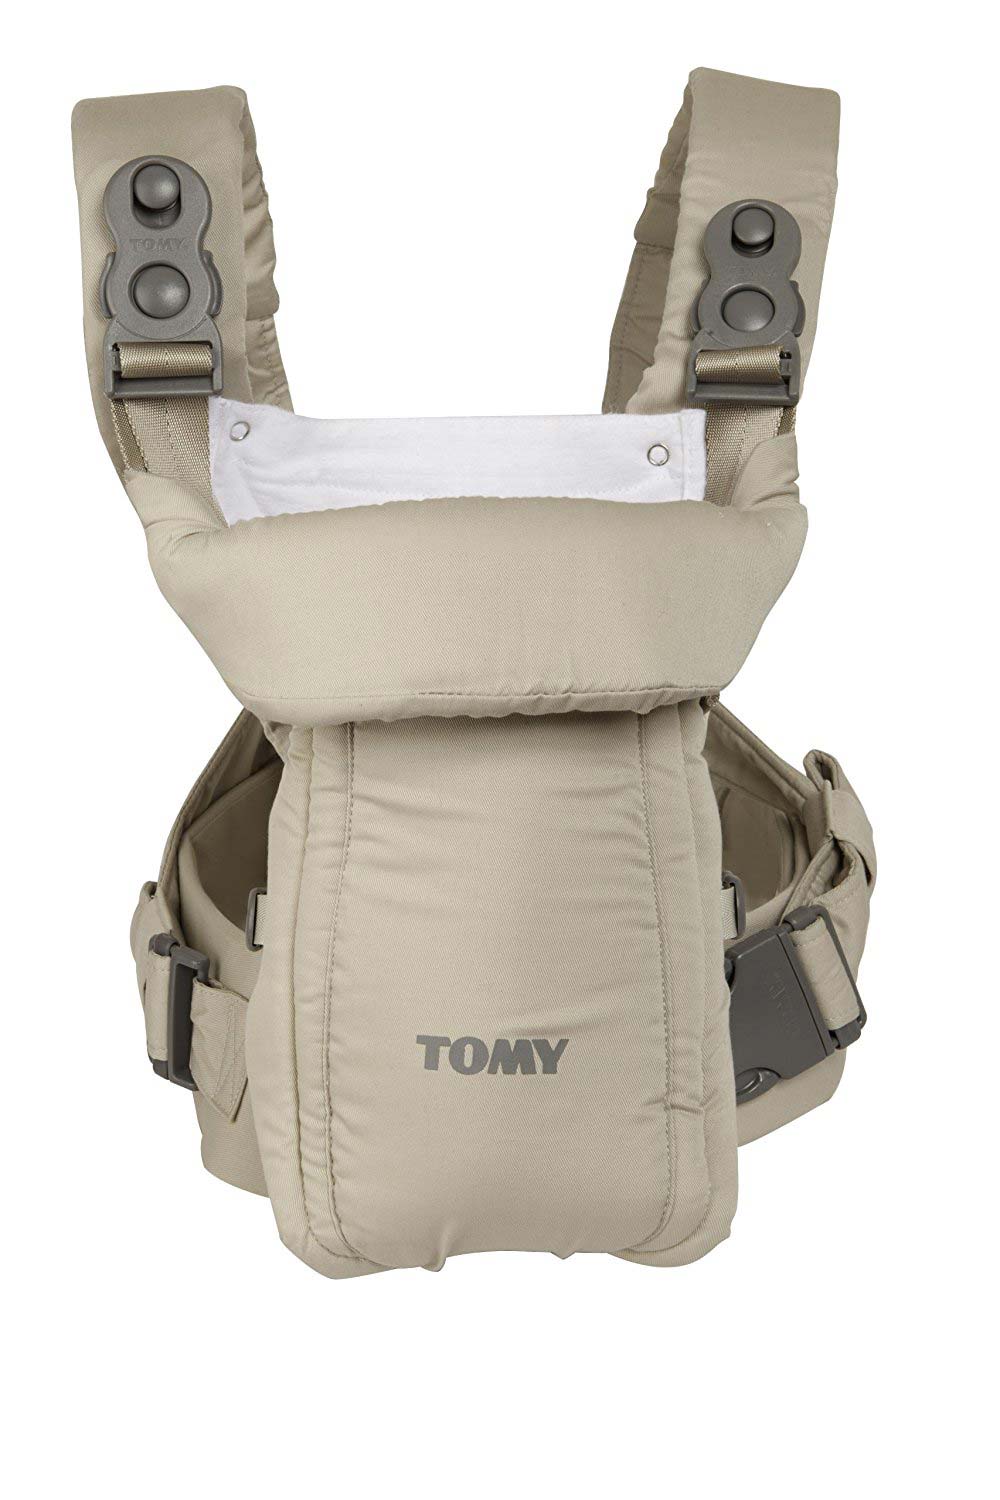 tomy freestyle baby sling